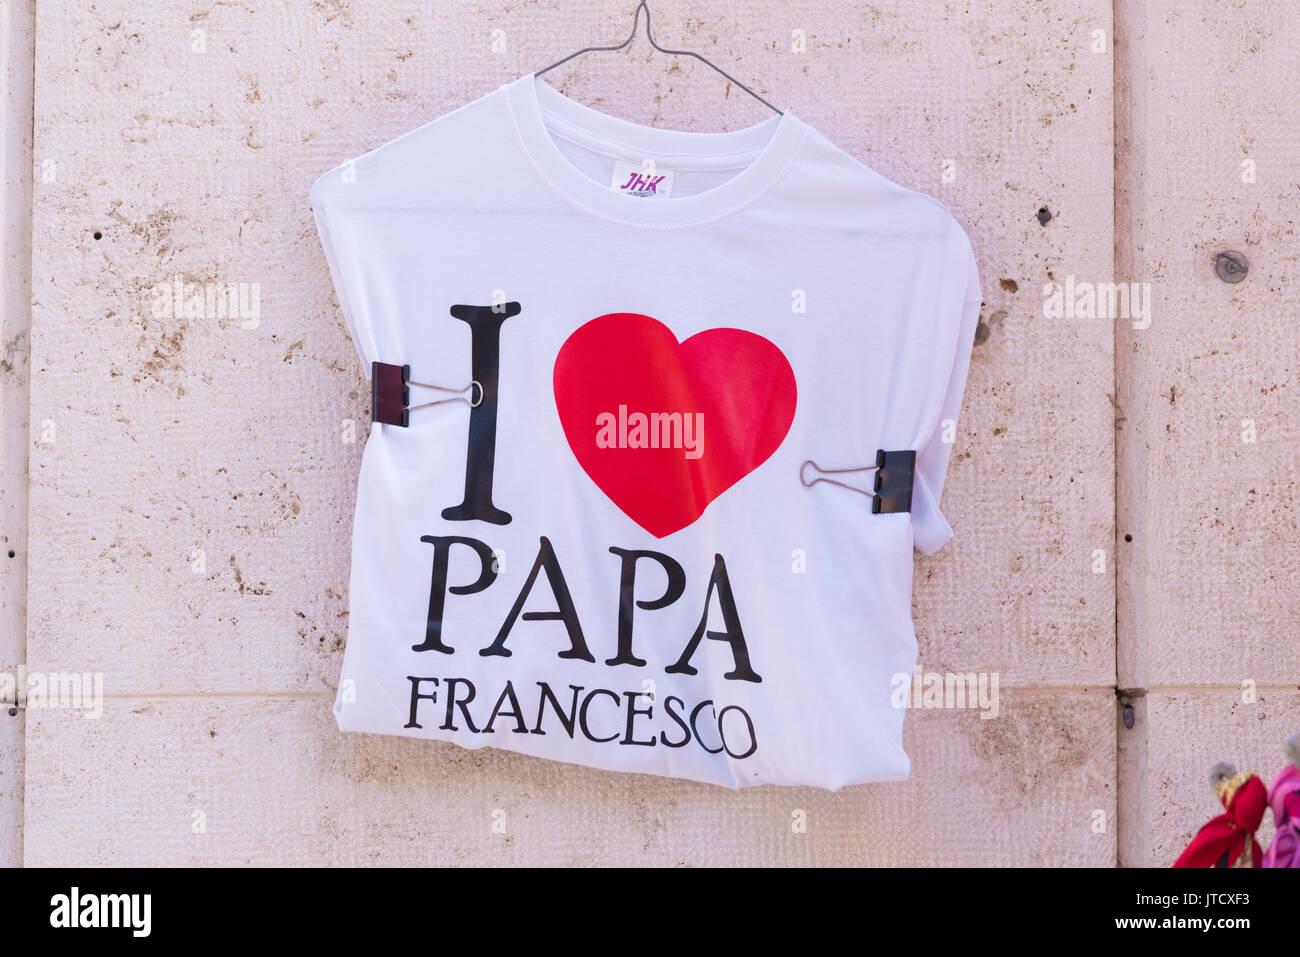 VATICAN CITY, VATICAN - OCTOBER 16, 2016: Touristis shirt with large red love heart saying I love papa francesco Stock Photo